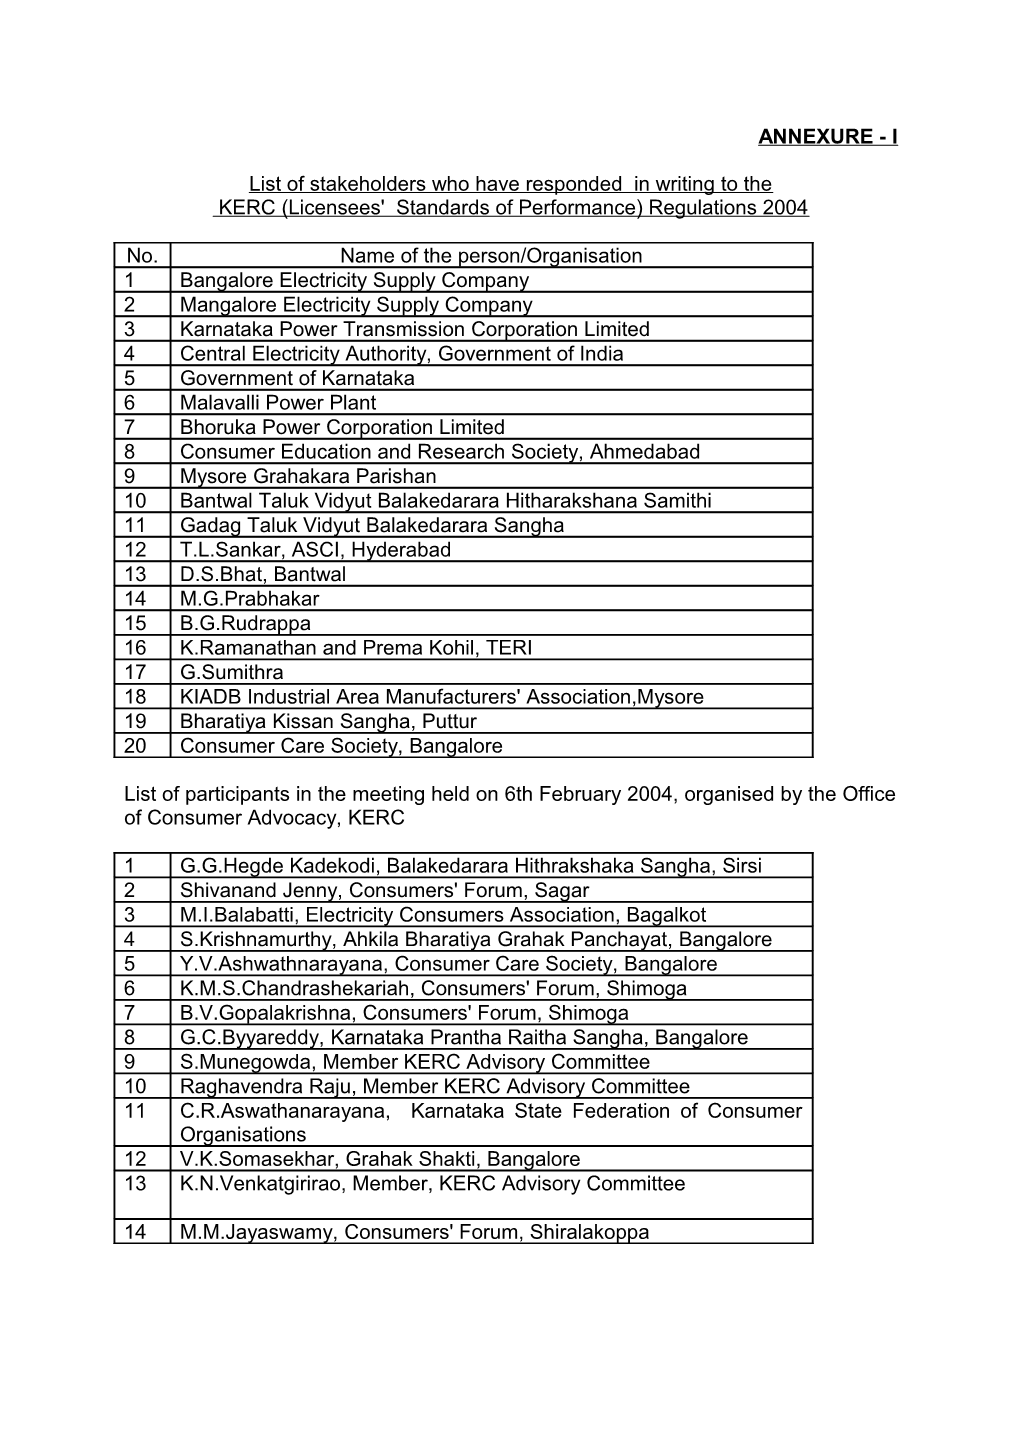 List of Stakeholders Who Have Responded in Writing to The